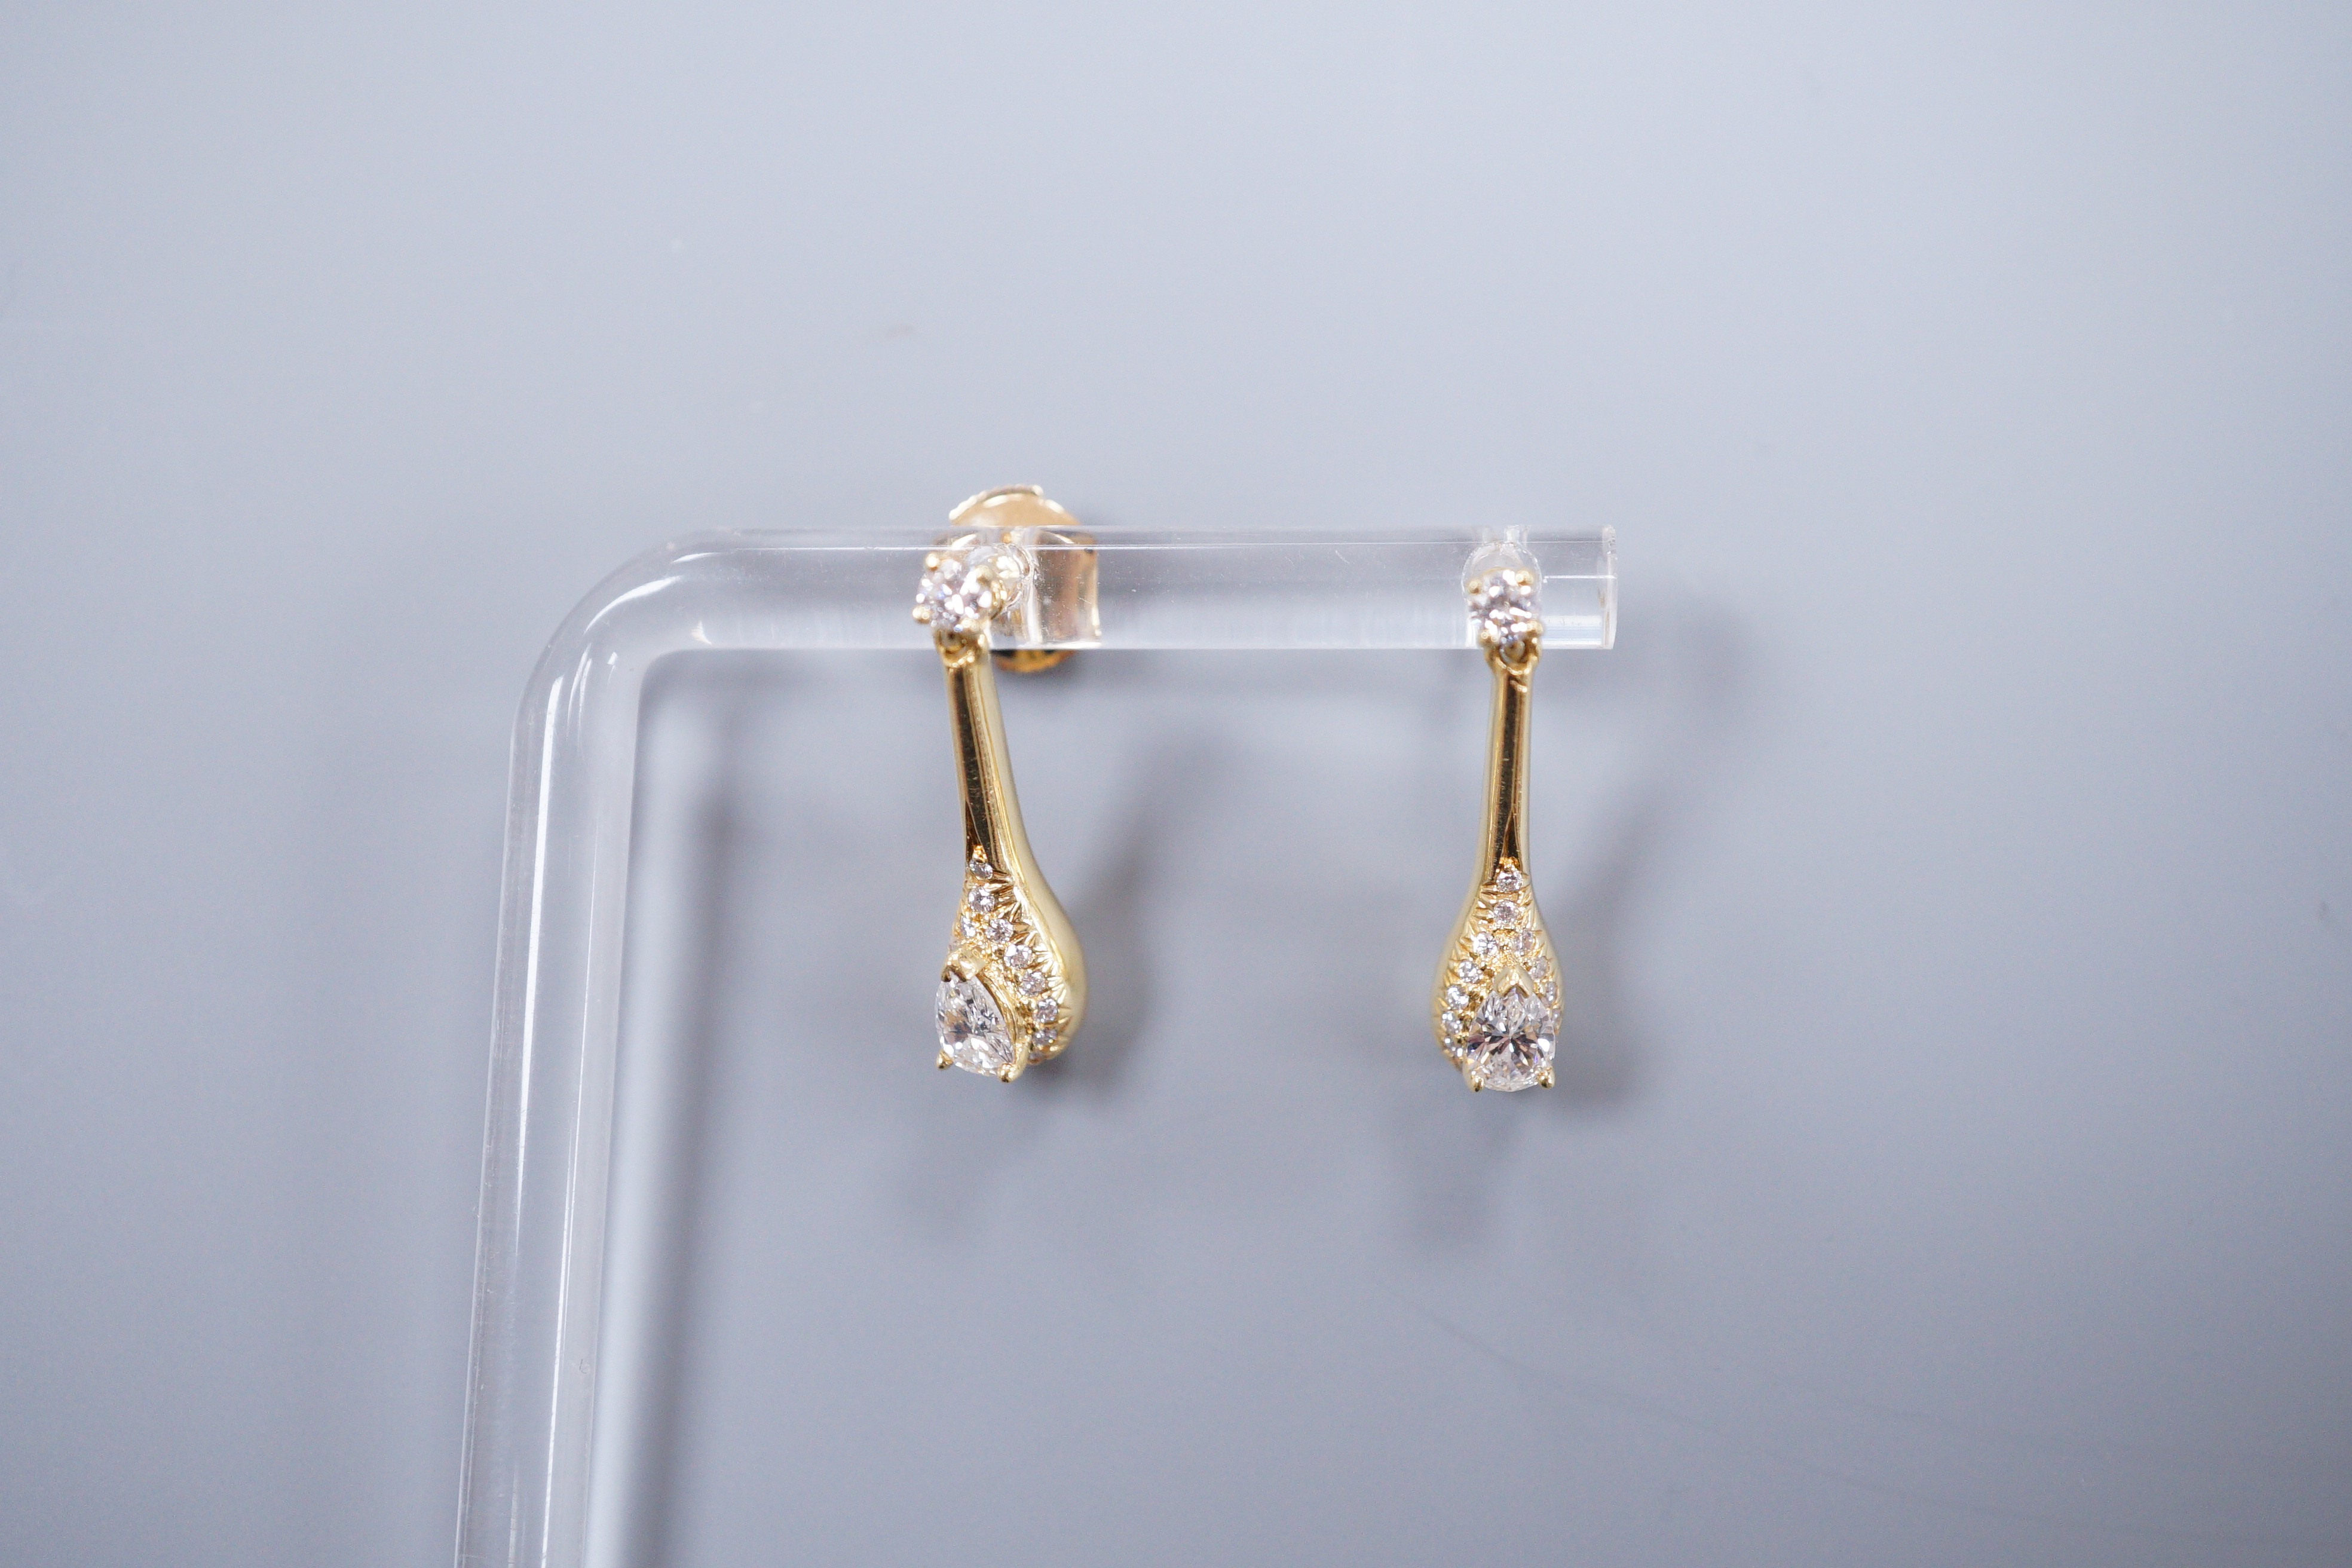 A pair of 18ct gold and diamond drop ear studs, each set with a tear shaped diamond within a border of brilliants, gross weight 5.3 grams